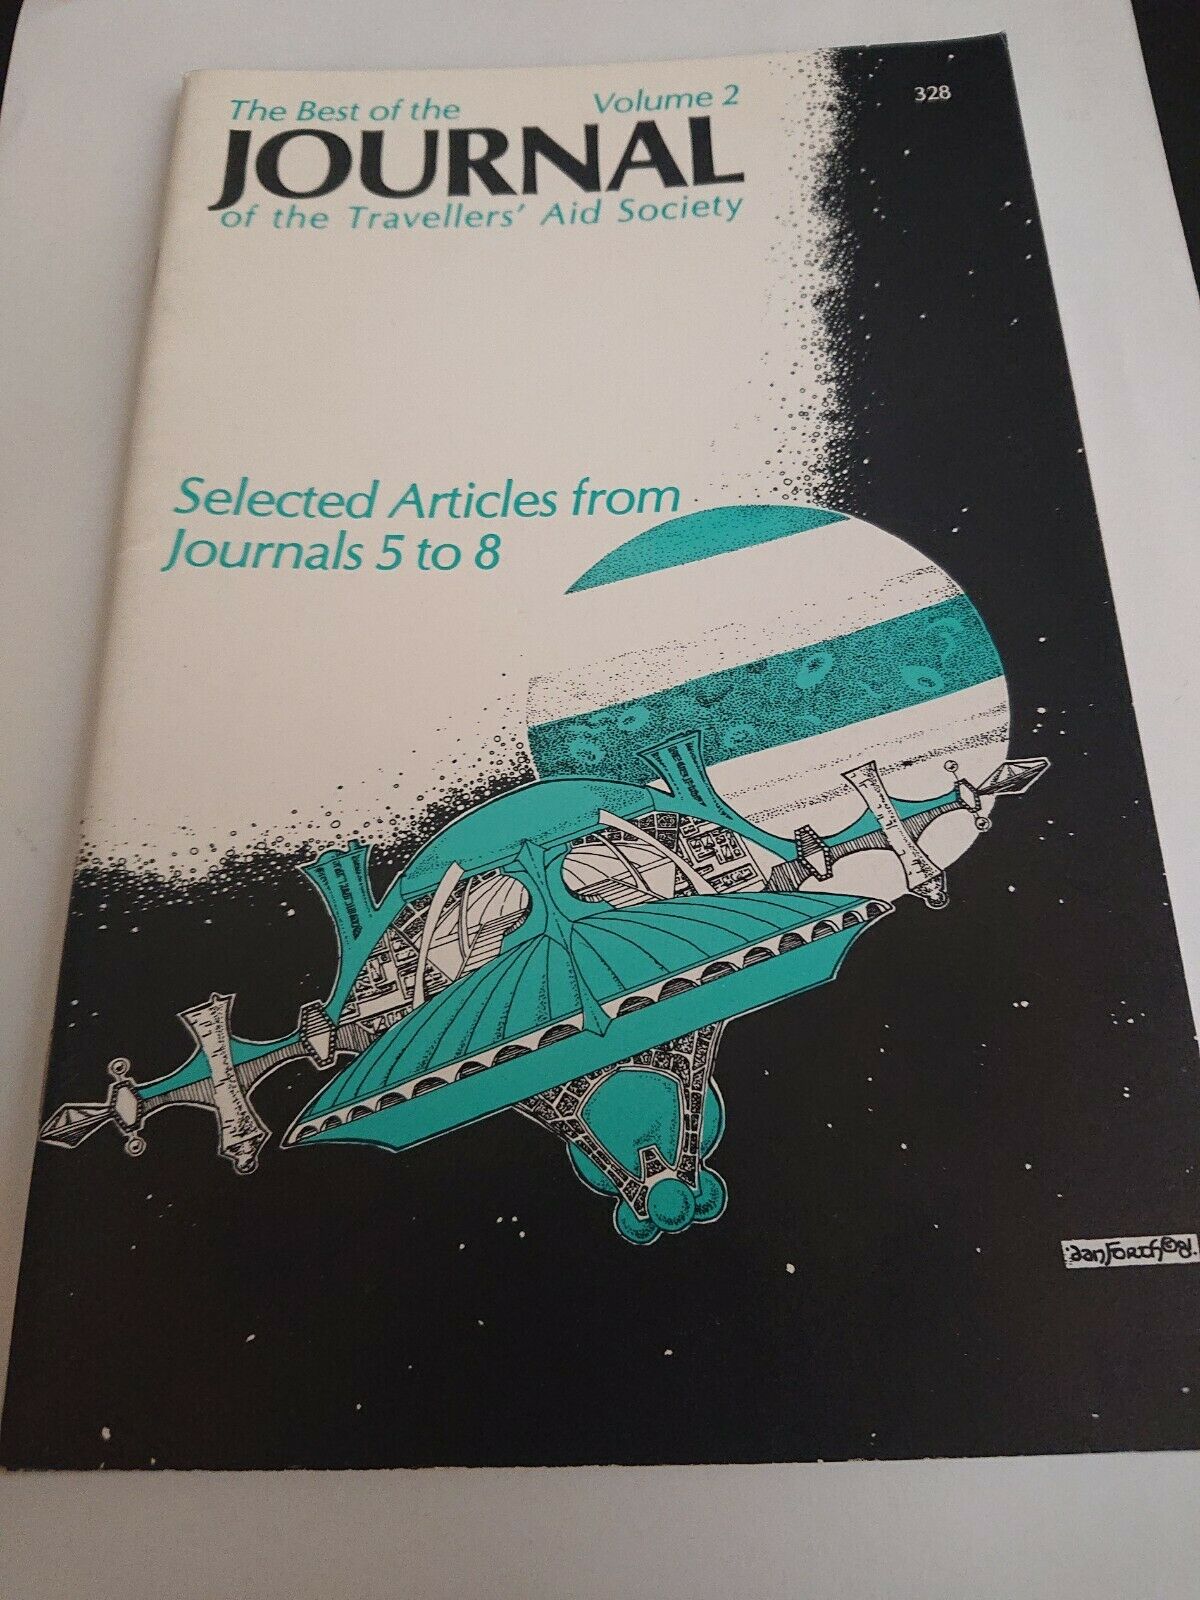 Best of the Journal of the Traveller's Aid Society Vol. 2 from 1981 | L.A. Mood Comics and Games